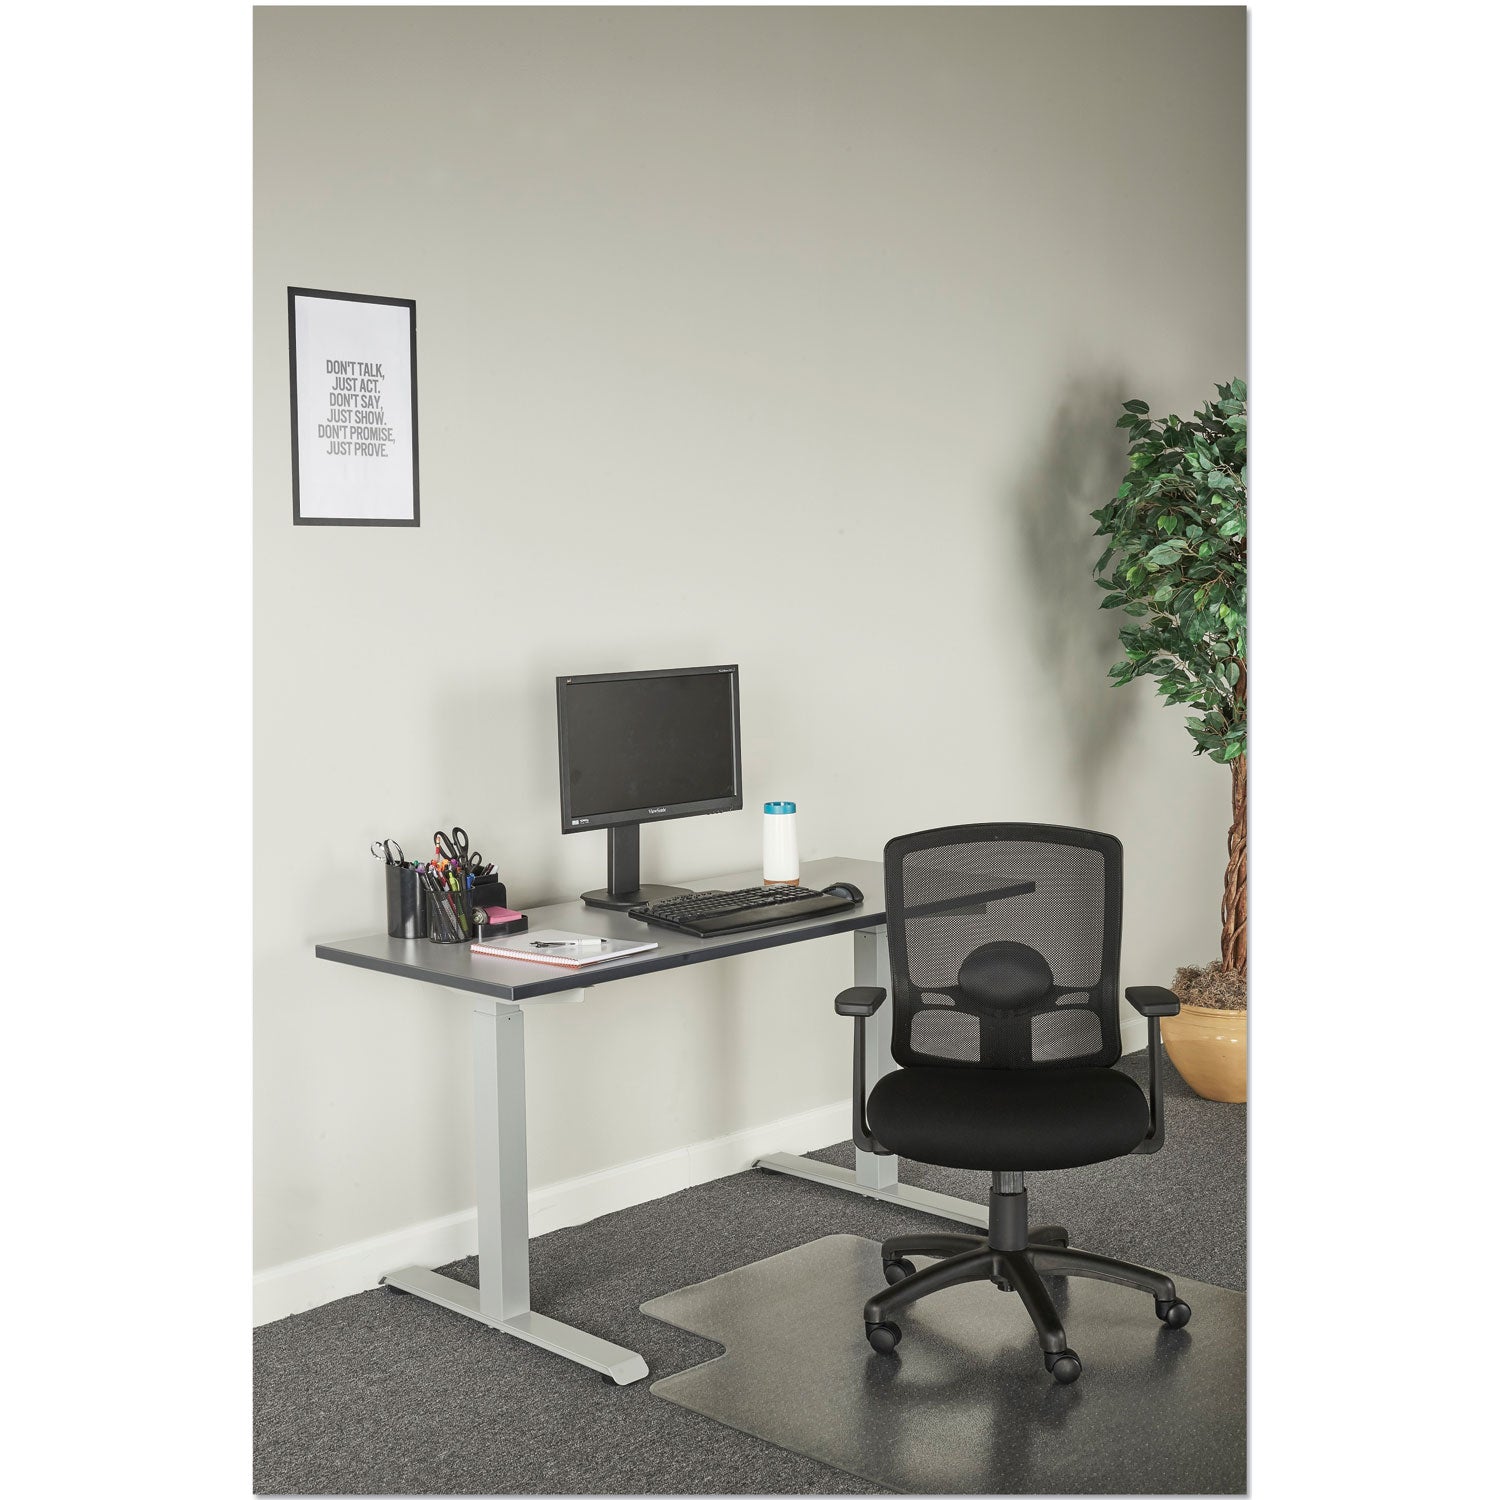 alera-etros-series-mesh-mid-back-petite-swivel-tilt-chair-supports-up-to-275-lb-1771-to-2165-seat-height-black_aleet4017b - 5